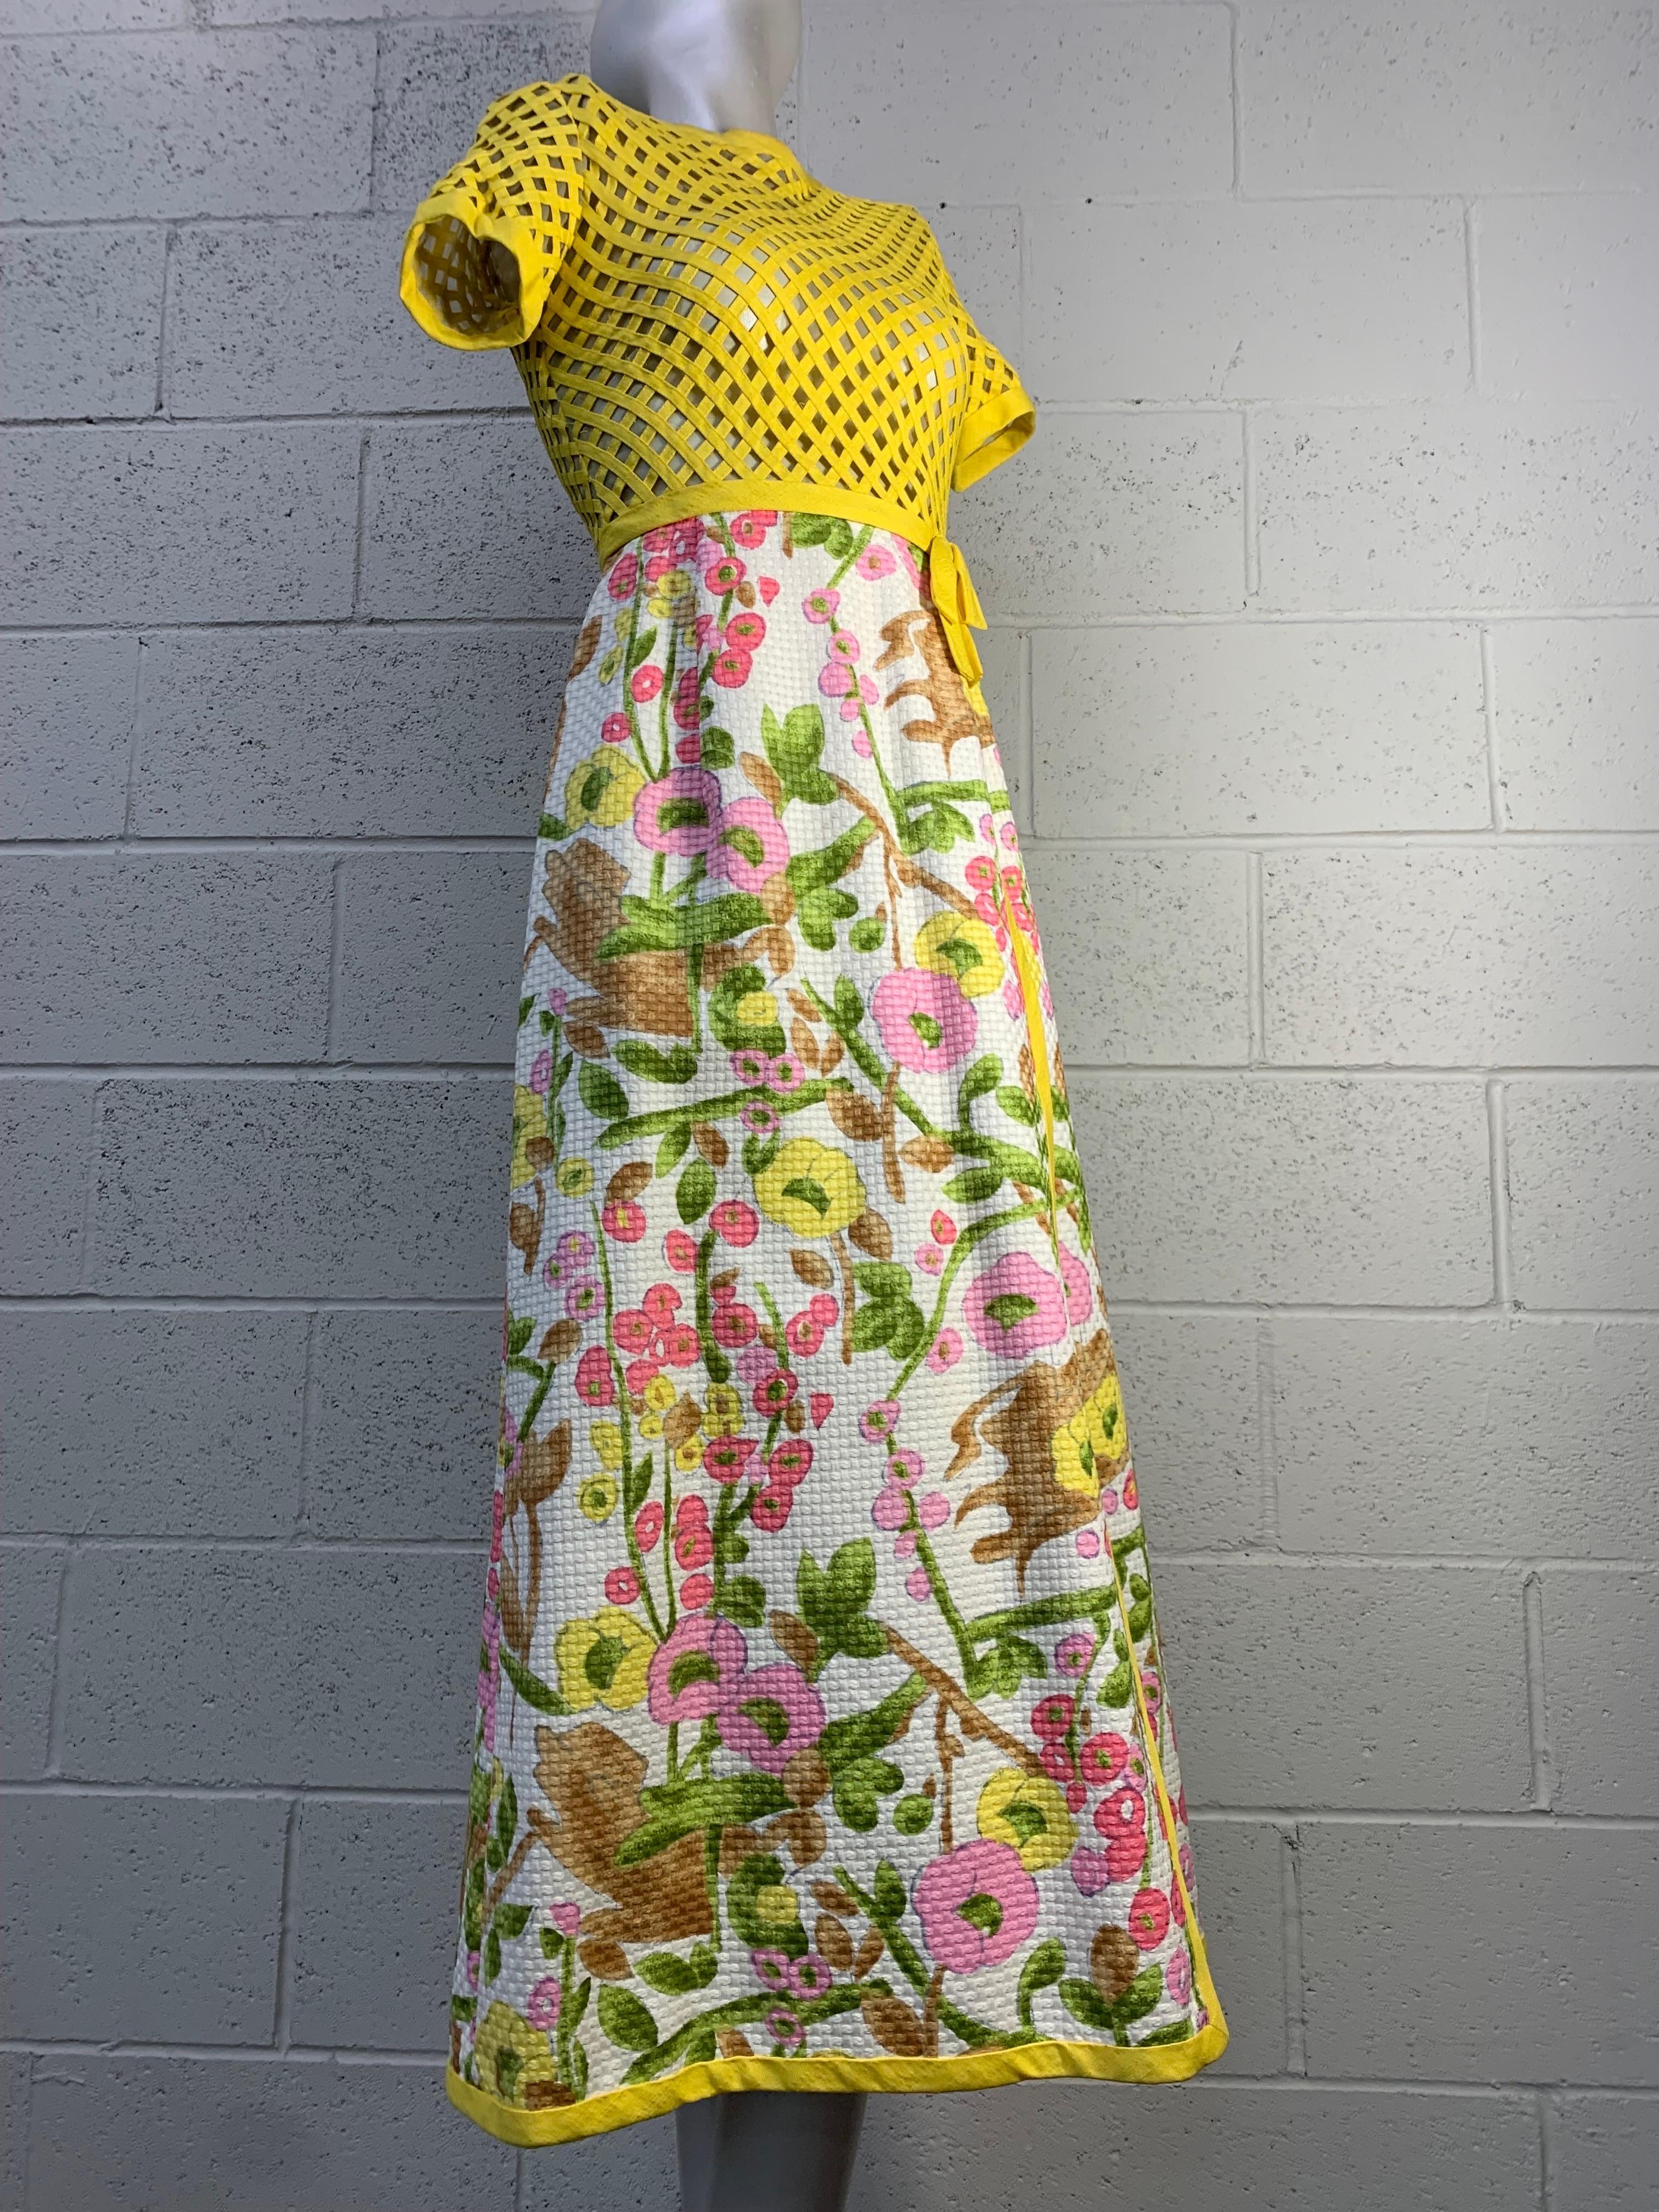 A wonderful 1960s Martha hostess gown with lemon yellow trellis-work short-sleeved bodice and a cotton pique floral print wrap skirt edged in matching yellow piping. Fully lined. Size 4.